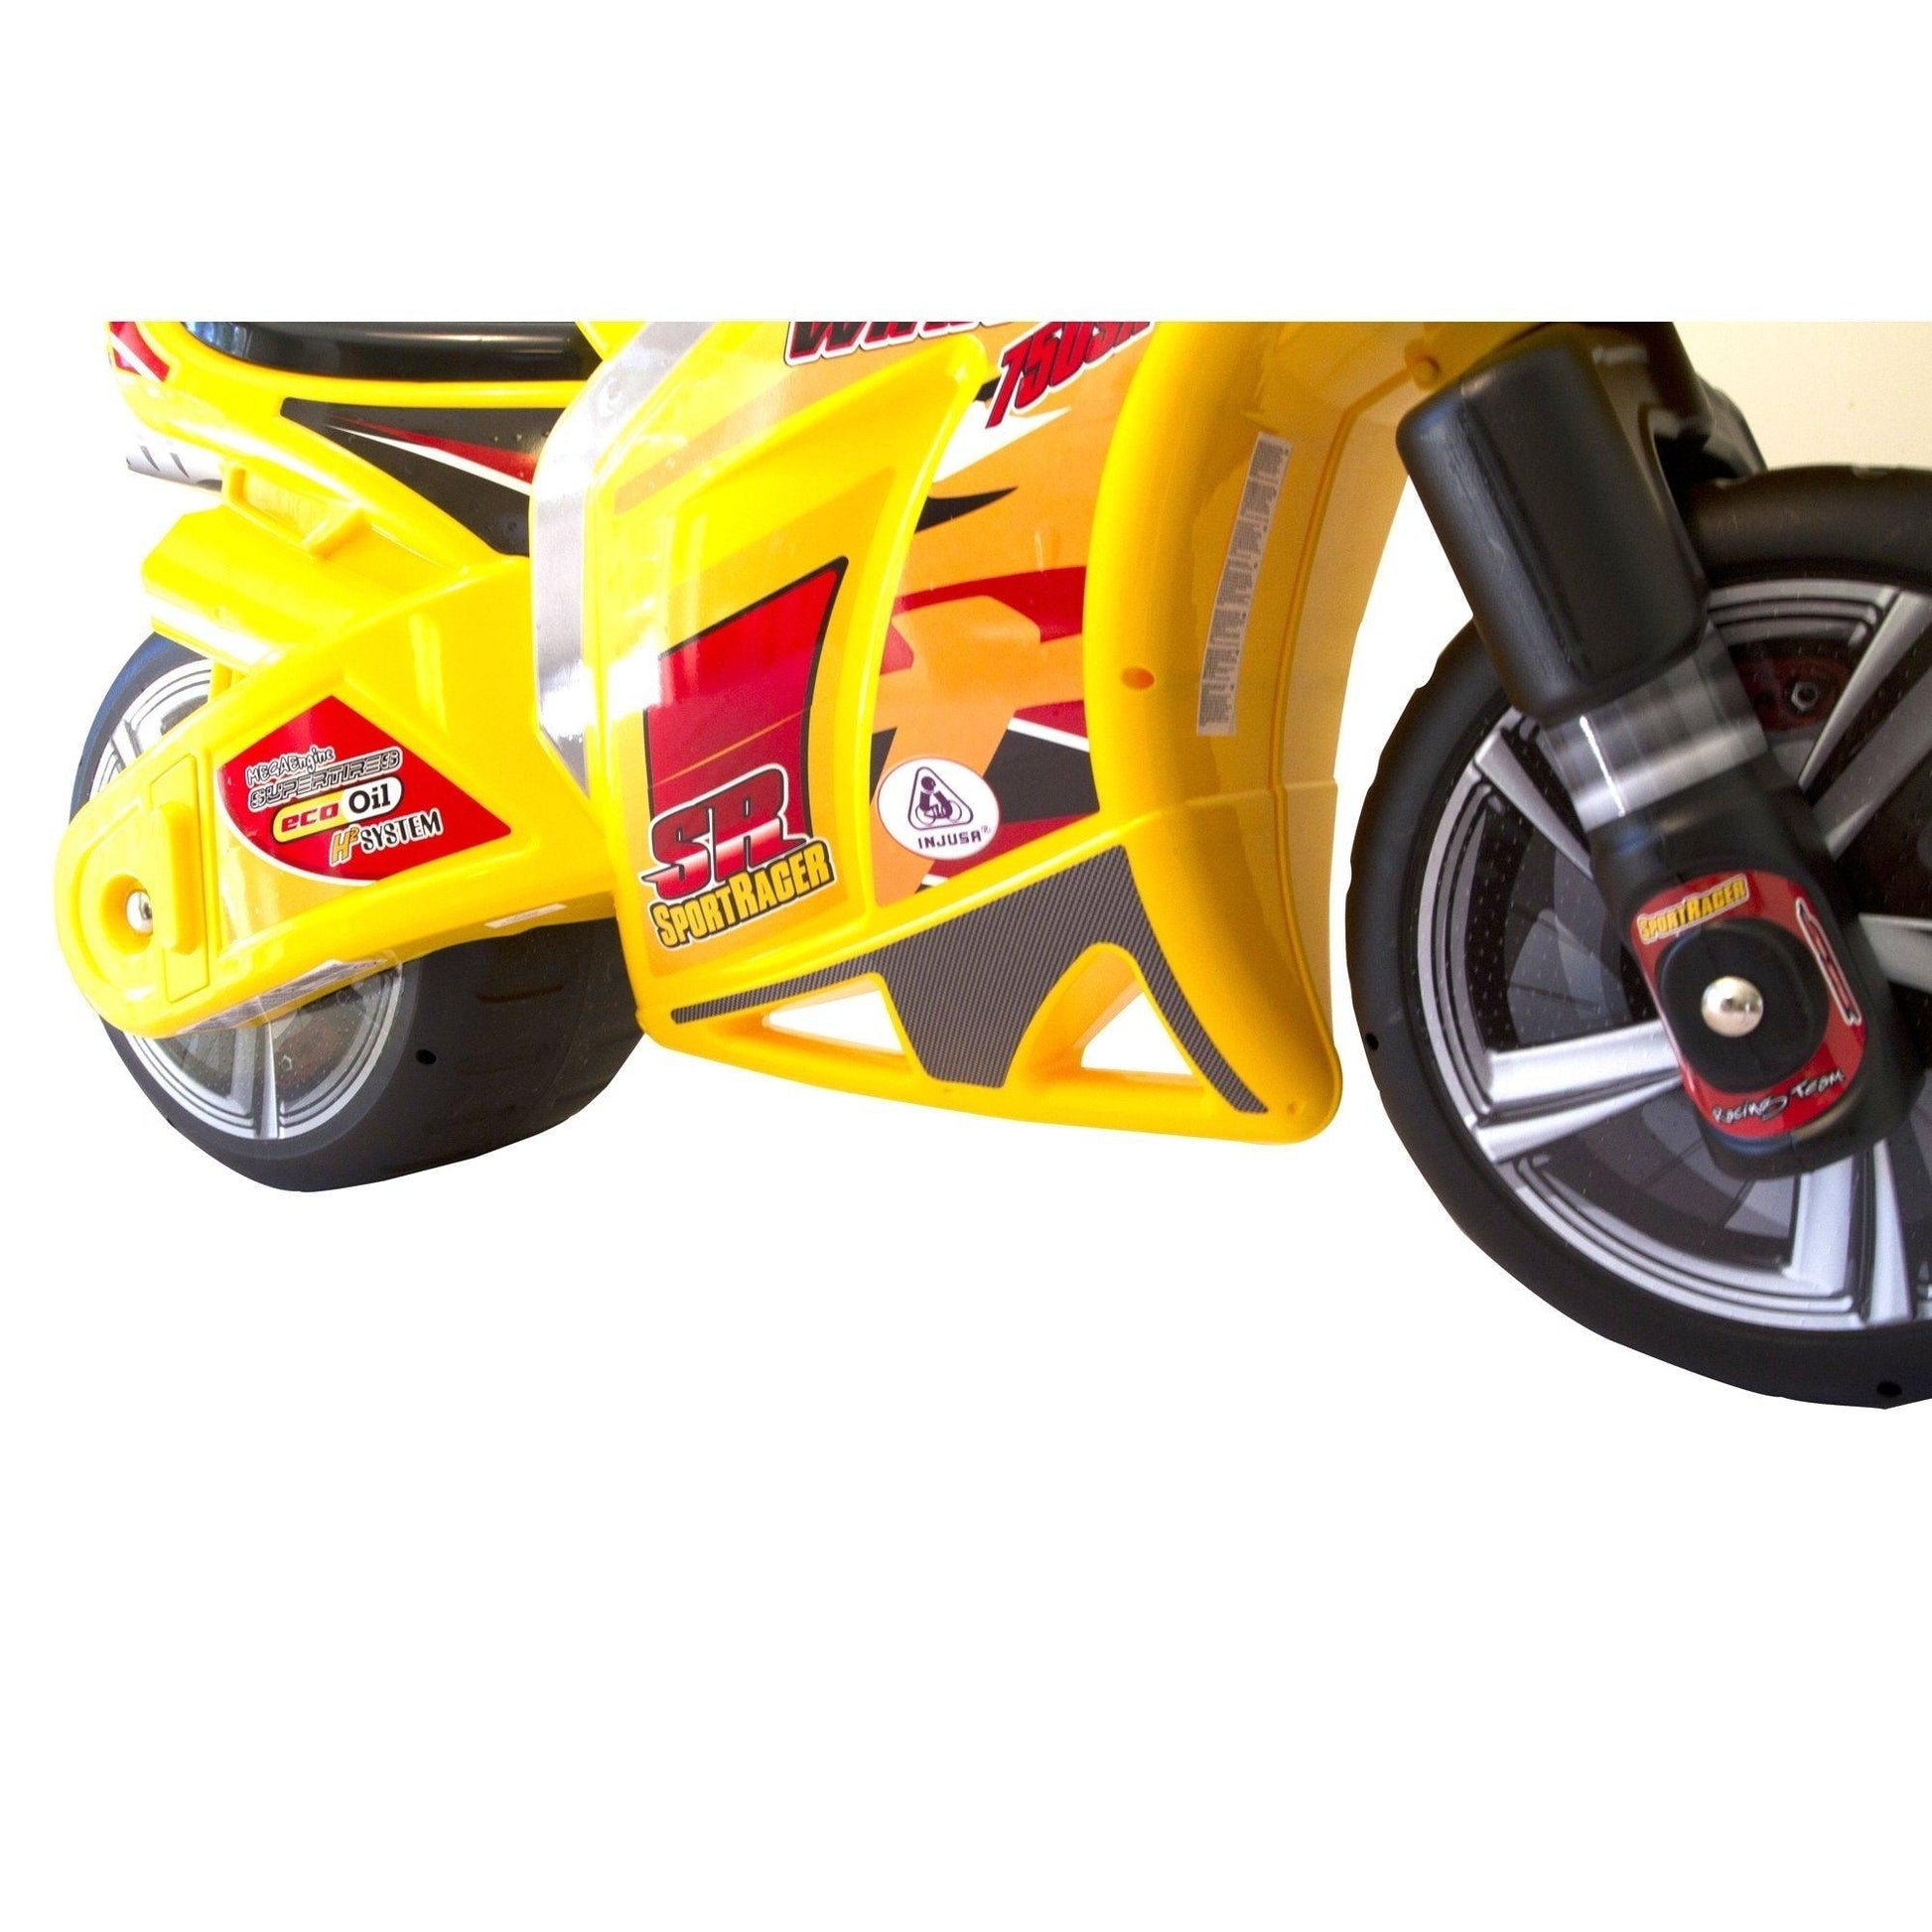 PATOYS | Injusa | Foot to Floor Winner Ride-on Yellow Recommended for Children 3+ - PATOYS